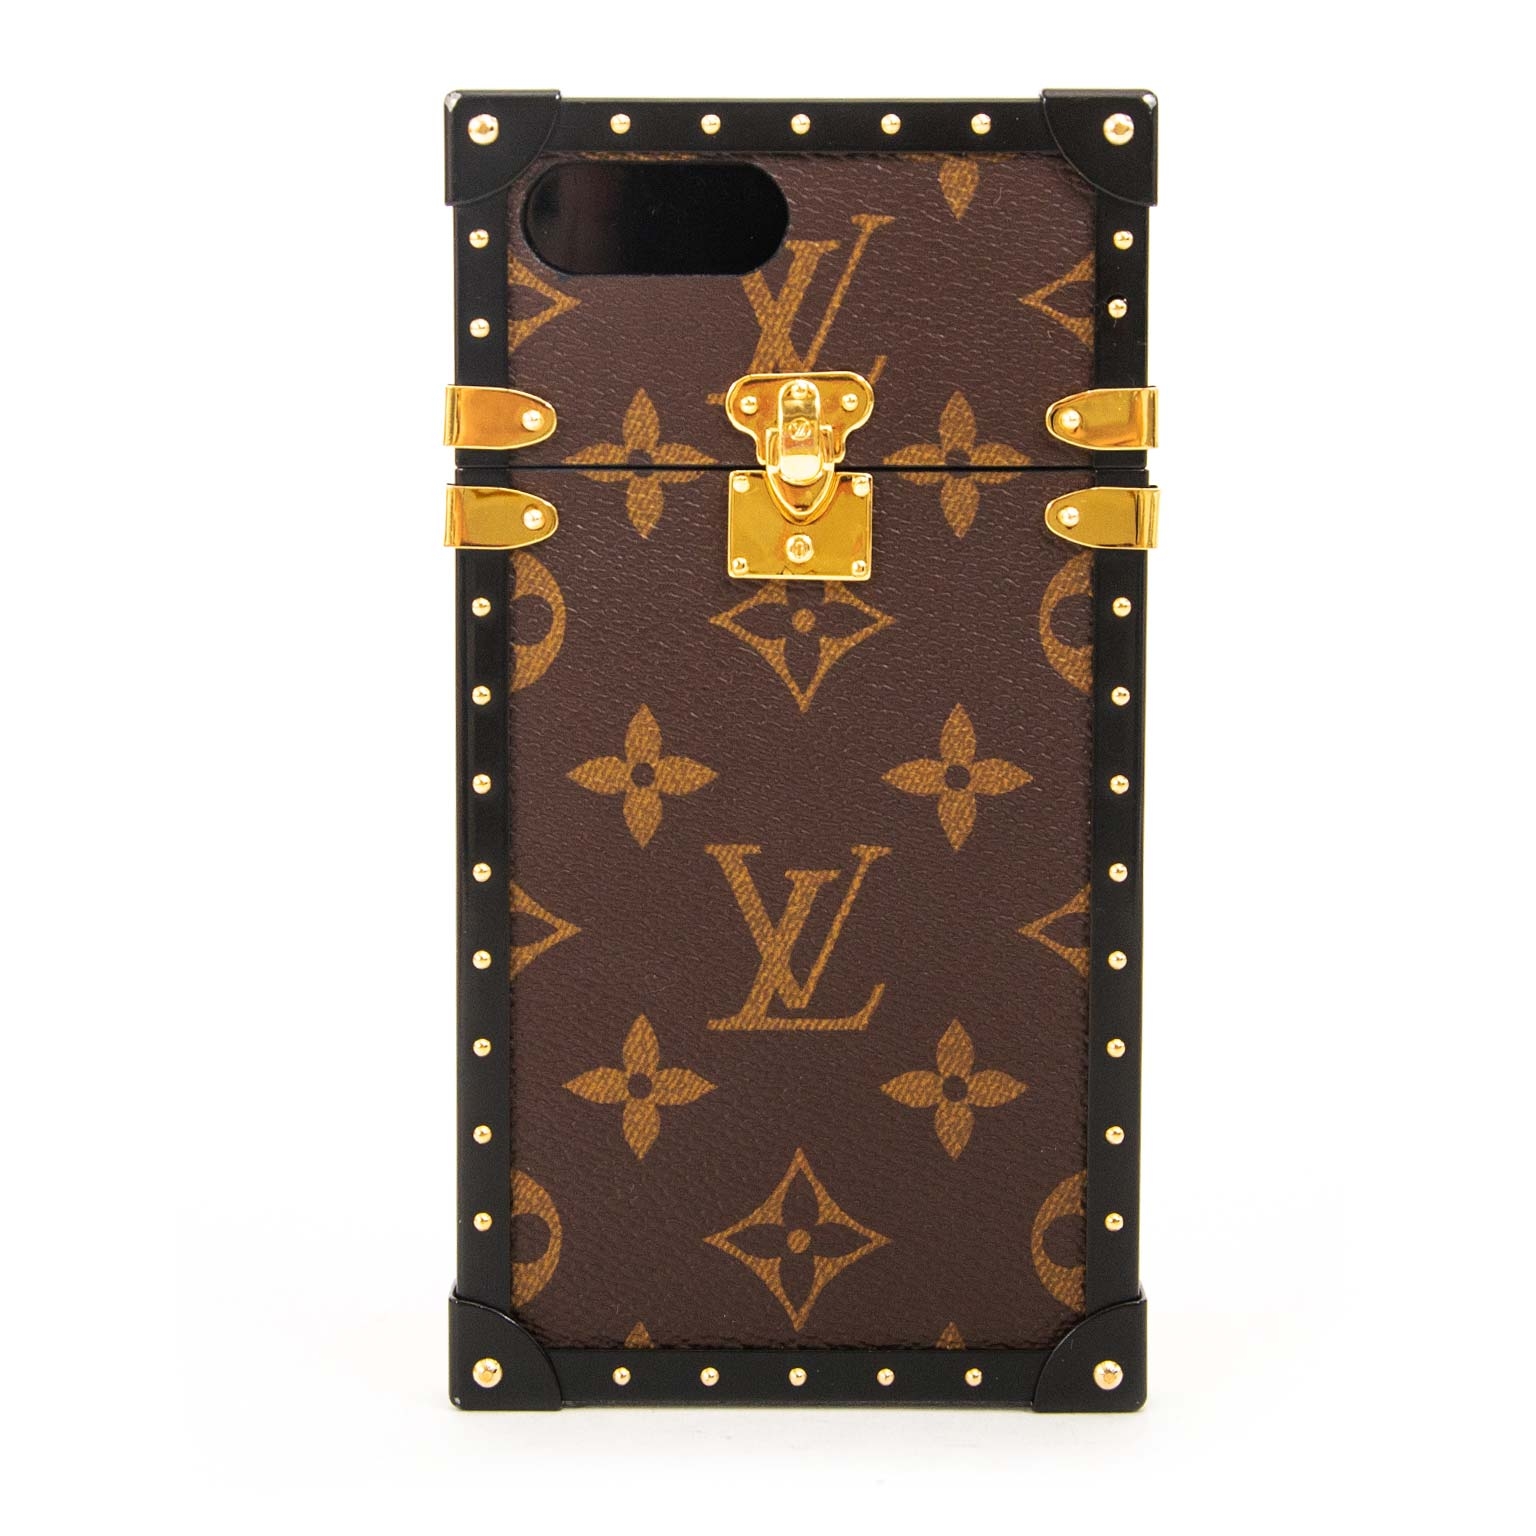 iPhone 7 and 7 Plus cases by Louis Vuitton start at $1,180 and go